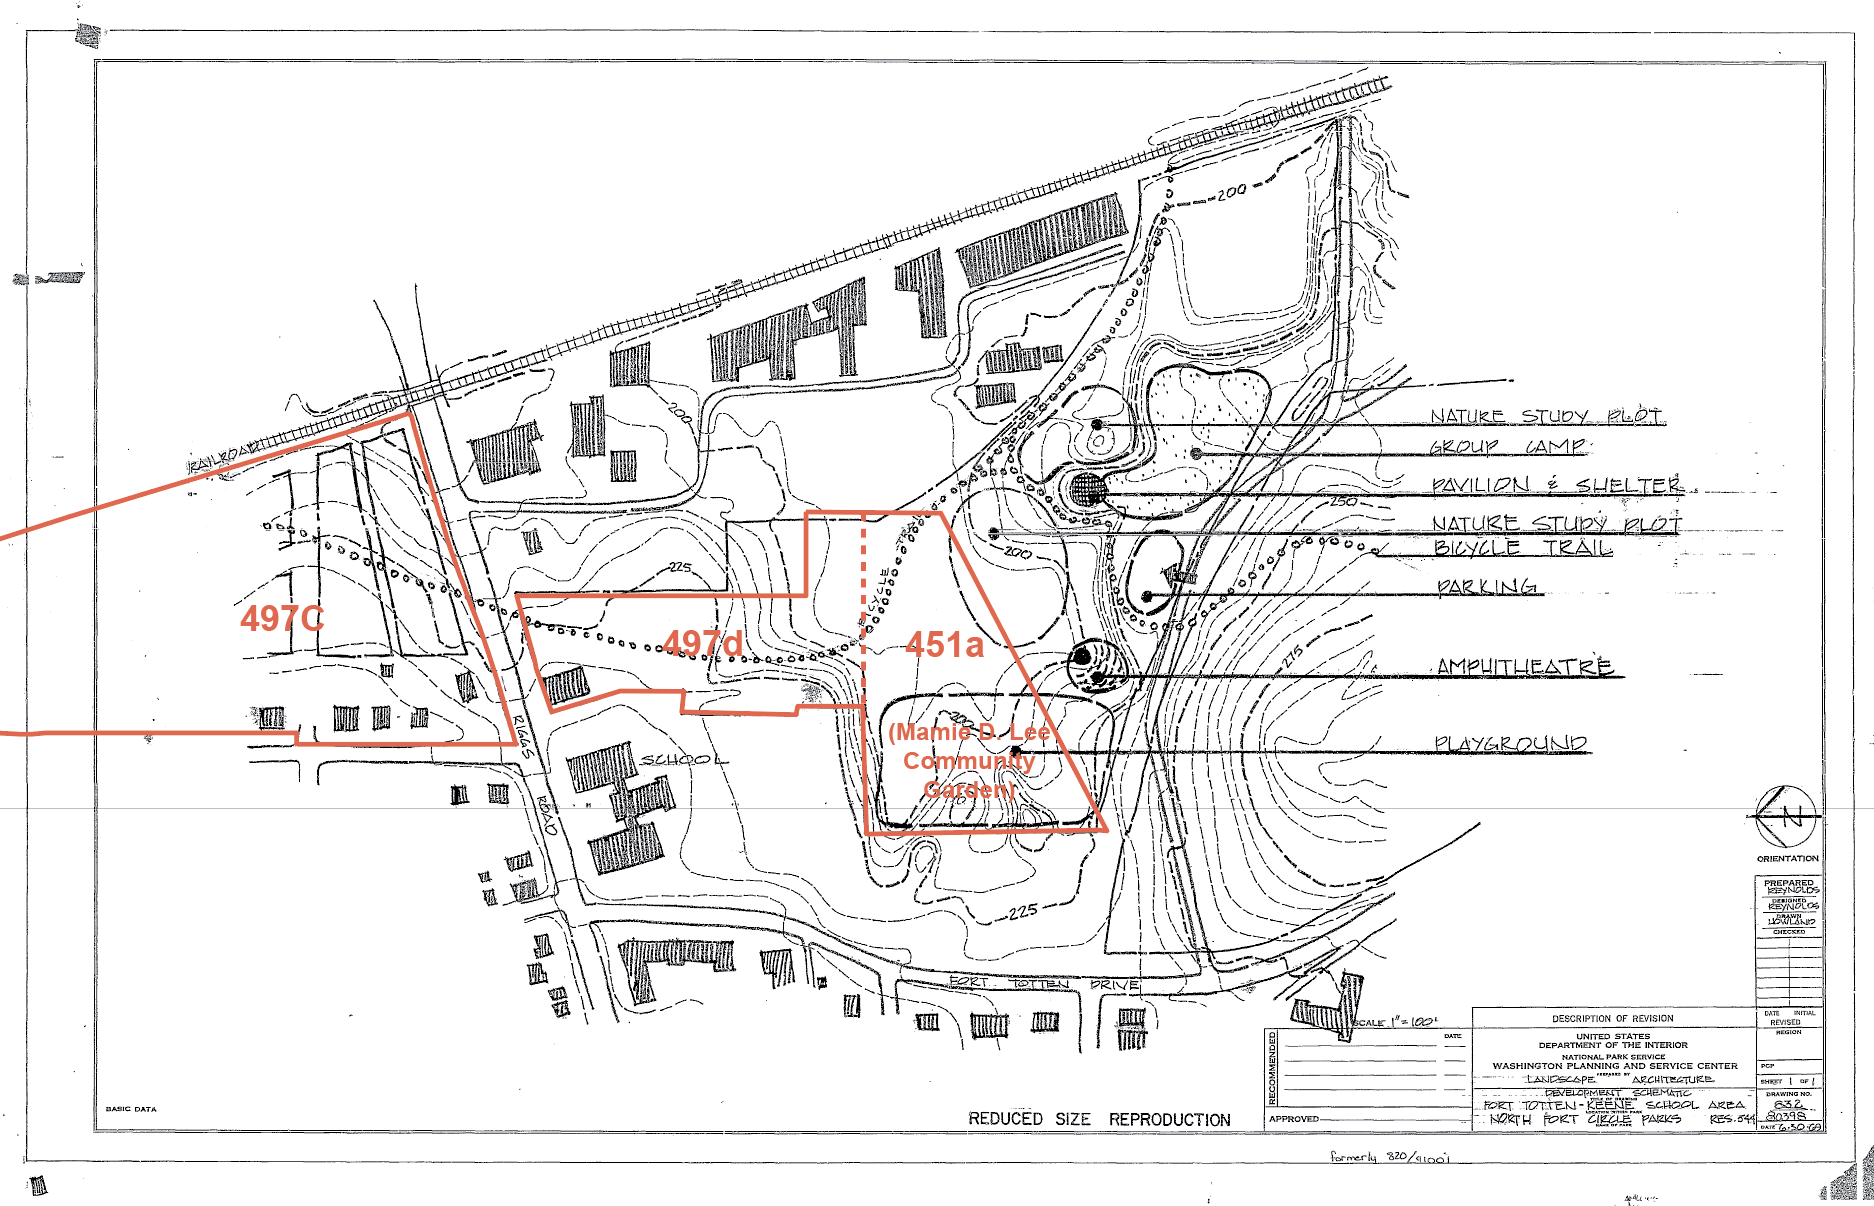  The 1968 Fort Circle Parks Master Plan called for a pedestrian/bicycle path (left) connecting Reservation 497(left), through Reservation 451a (pictured), to Fort Totten Park (right, off the map). The plan called for a playground, amphitheater, parki